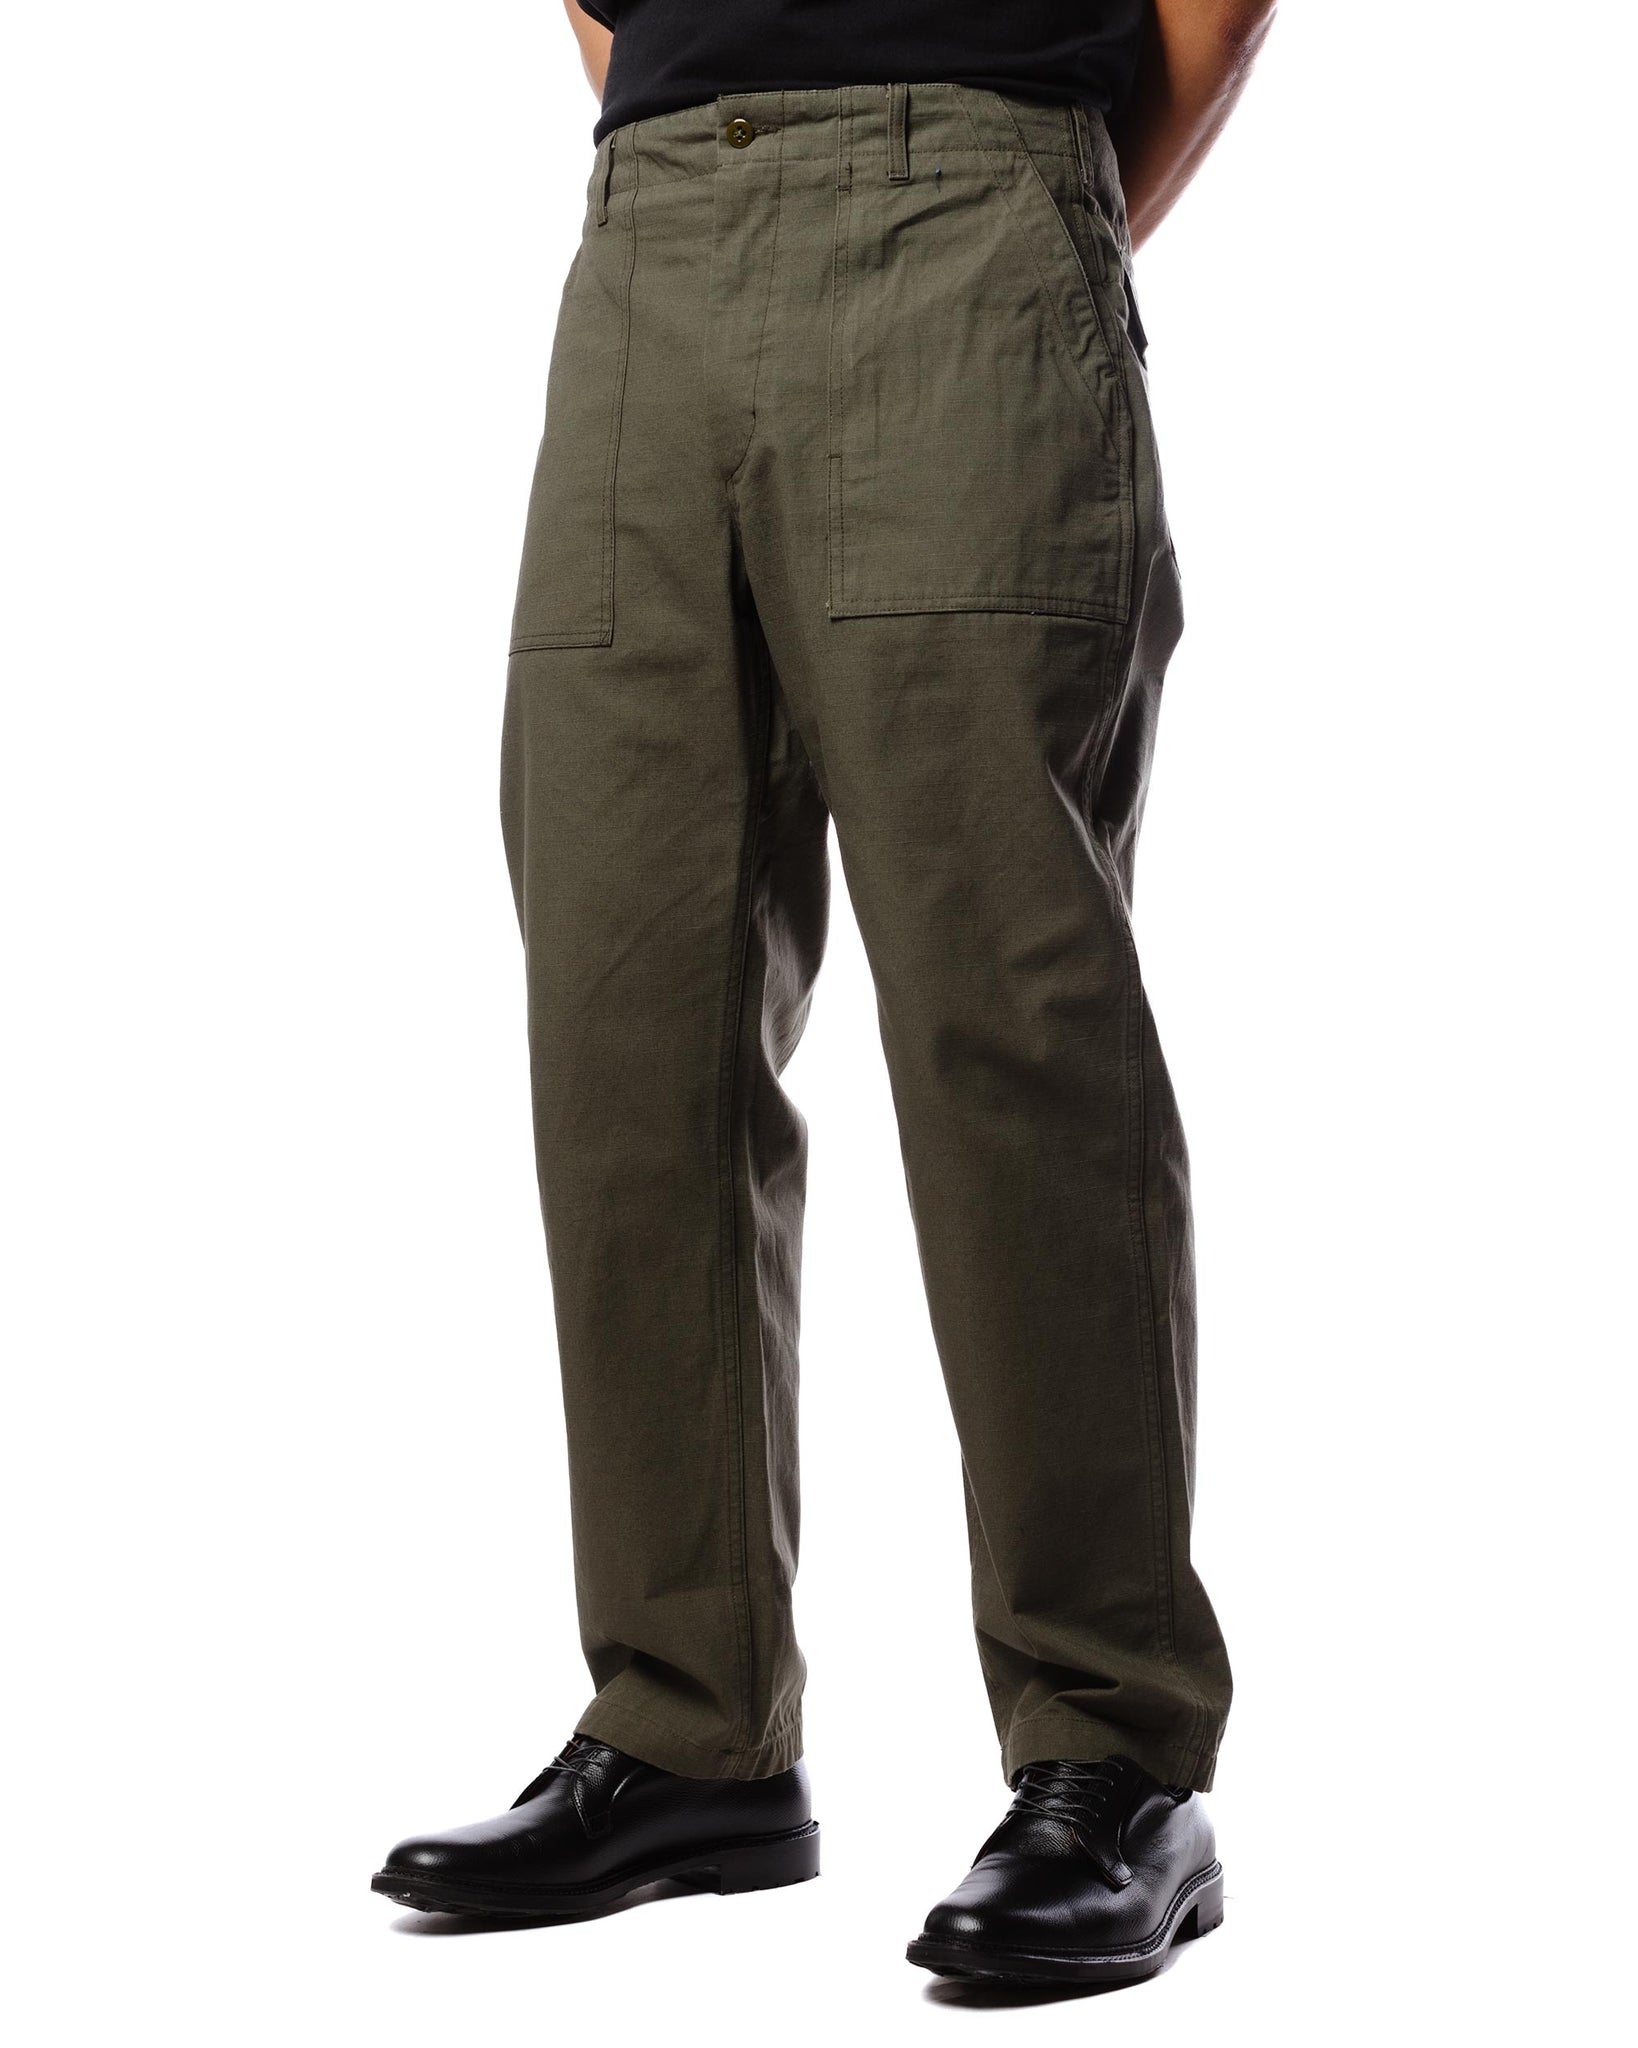 Engineered Garments Fatigue Pant Olive Heavyweight Cotton Ripstop Model Detail